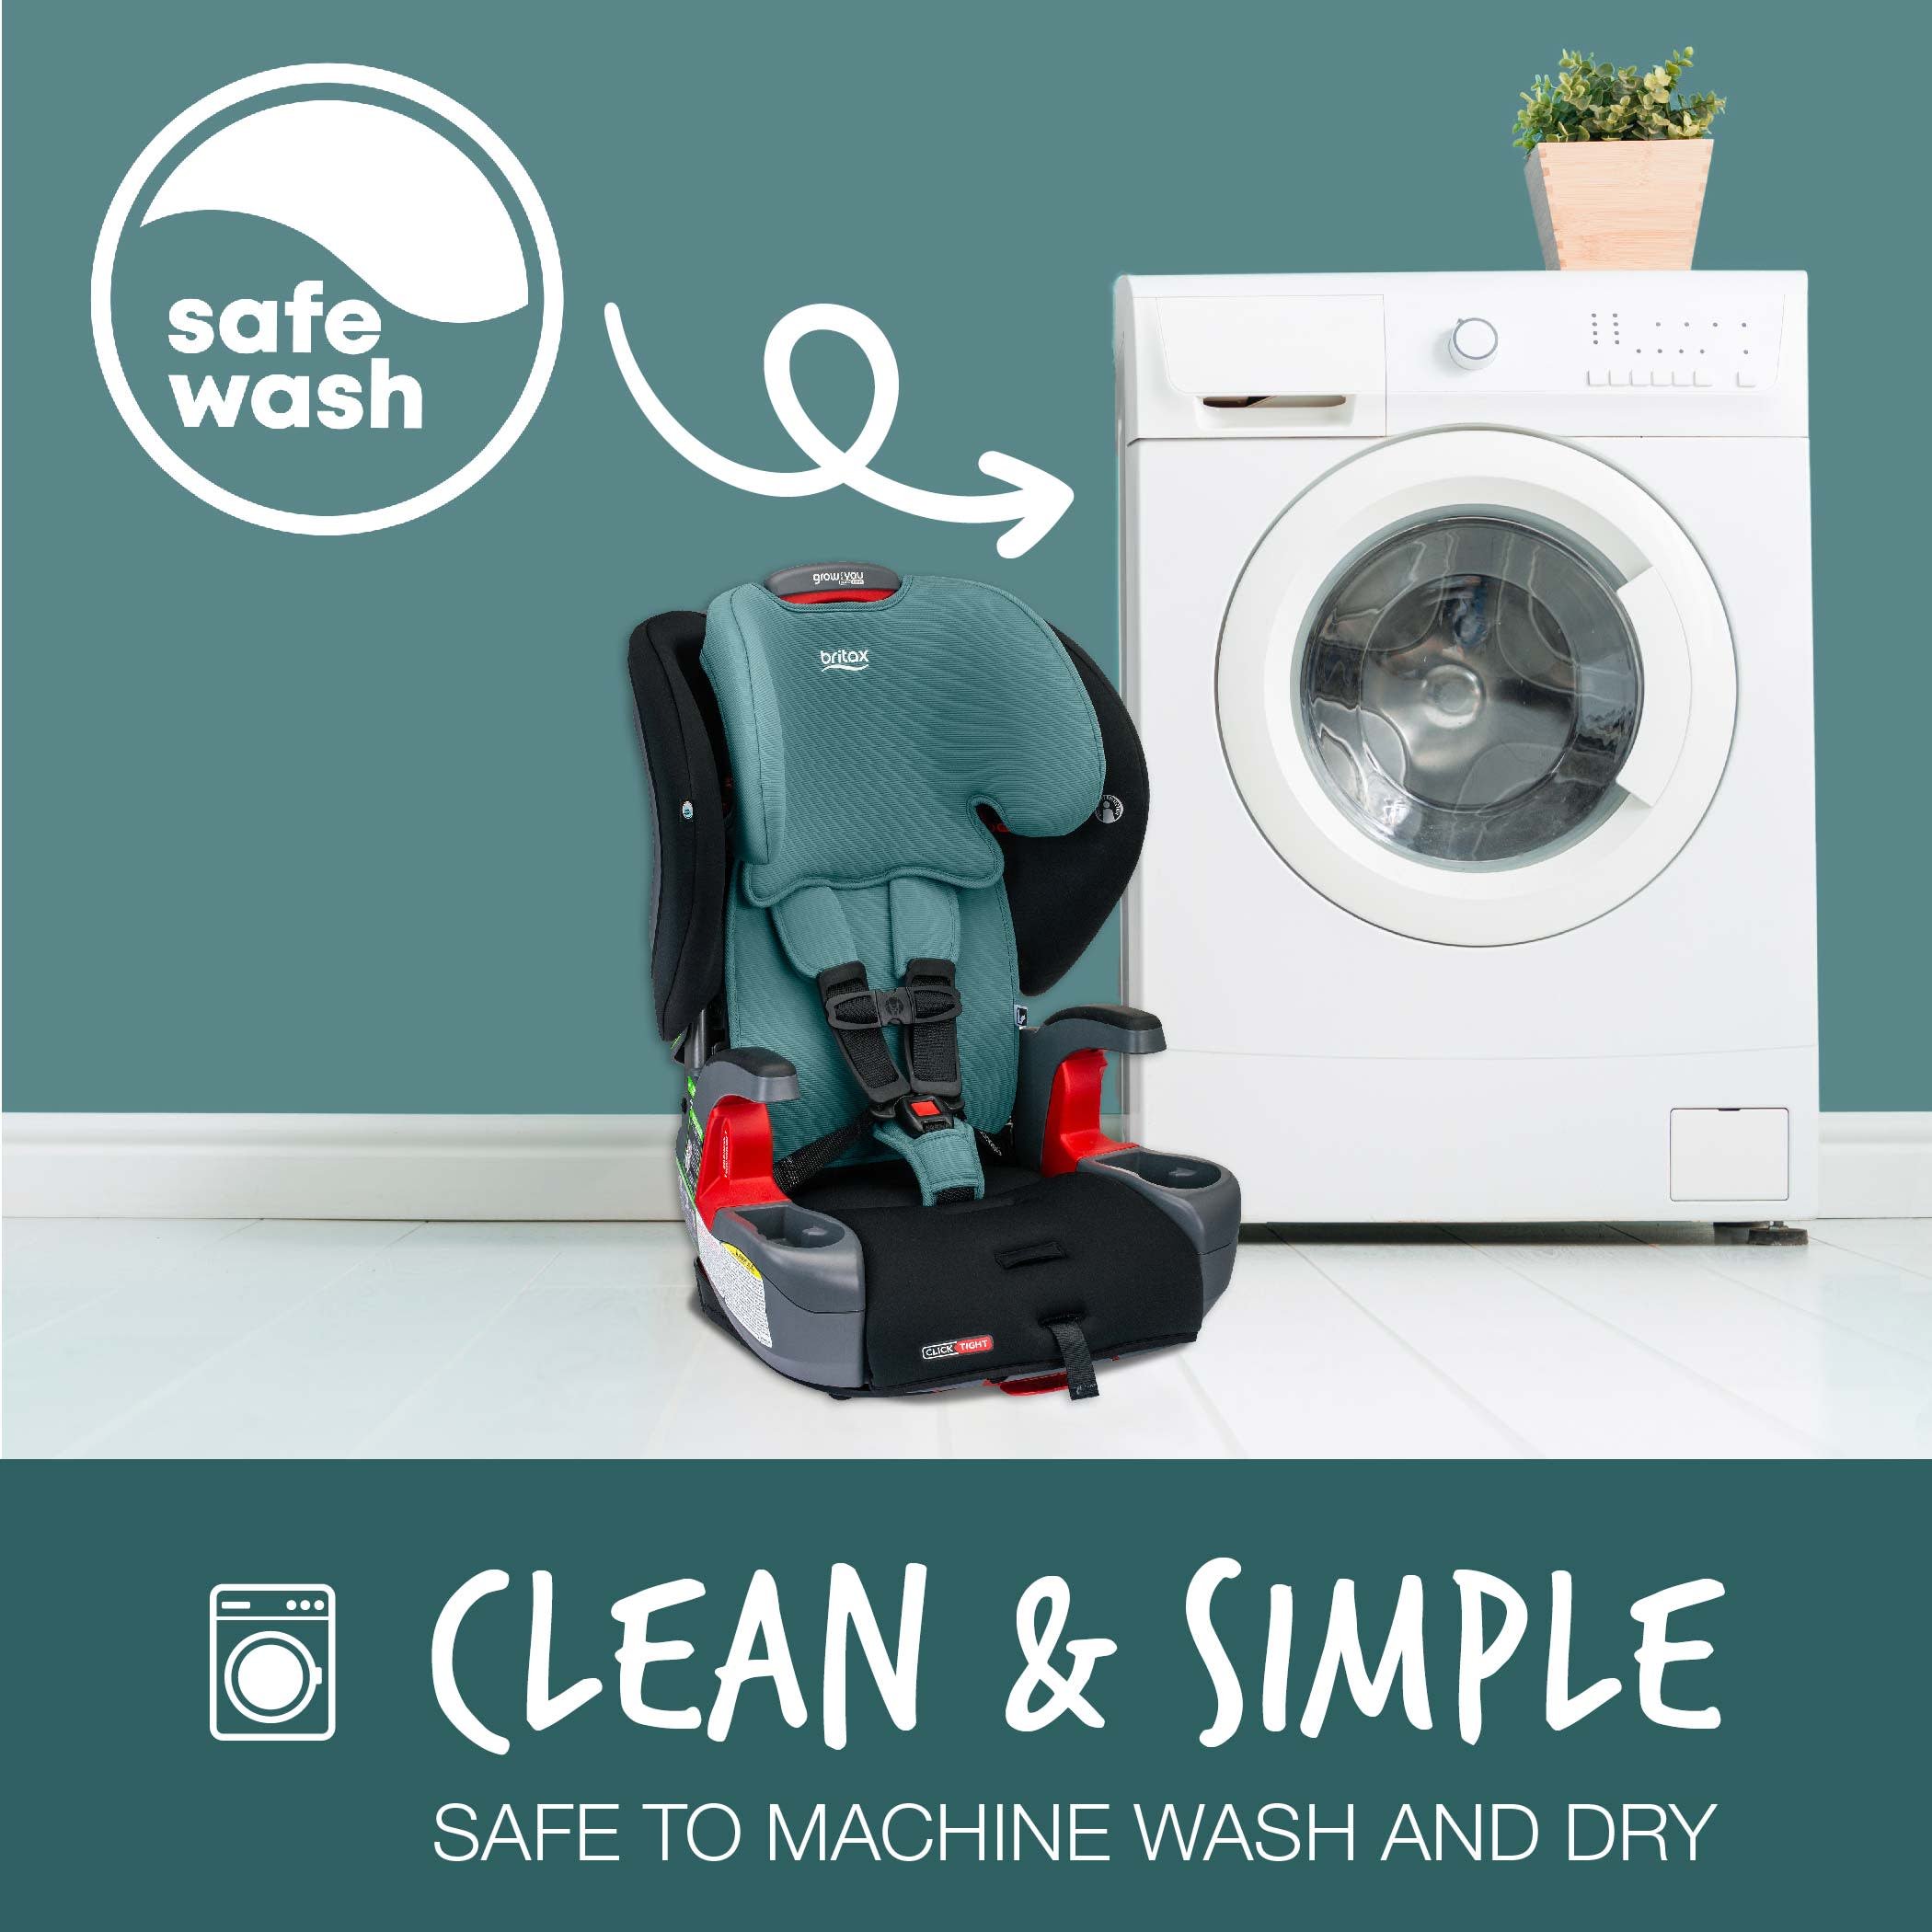 Green Contour Grow With You ClickTight Car Seat next to a washing machine